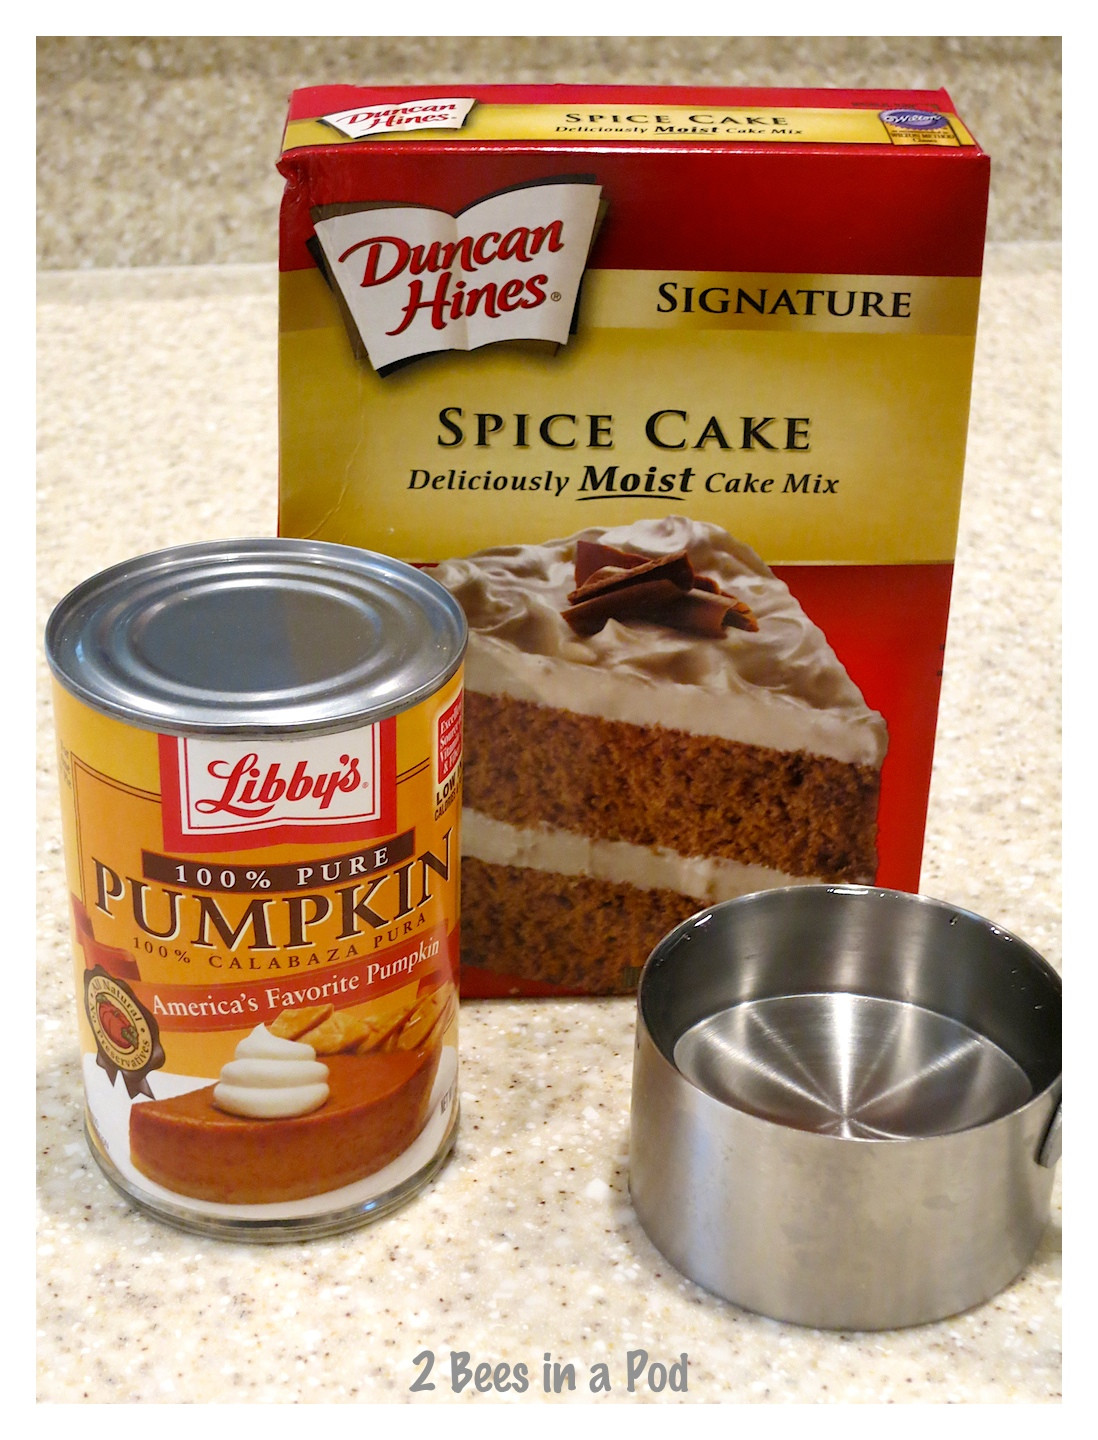 Weight Watchers Pumpkin Spice Cake Awesome Weight Watchers Pumpkin Spiced Muffins 2 Bees In A Pod